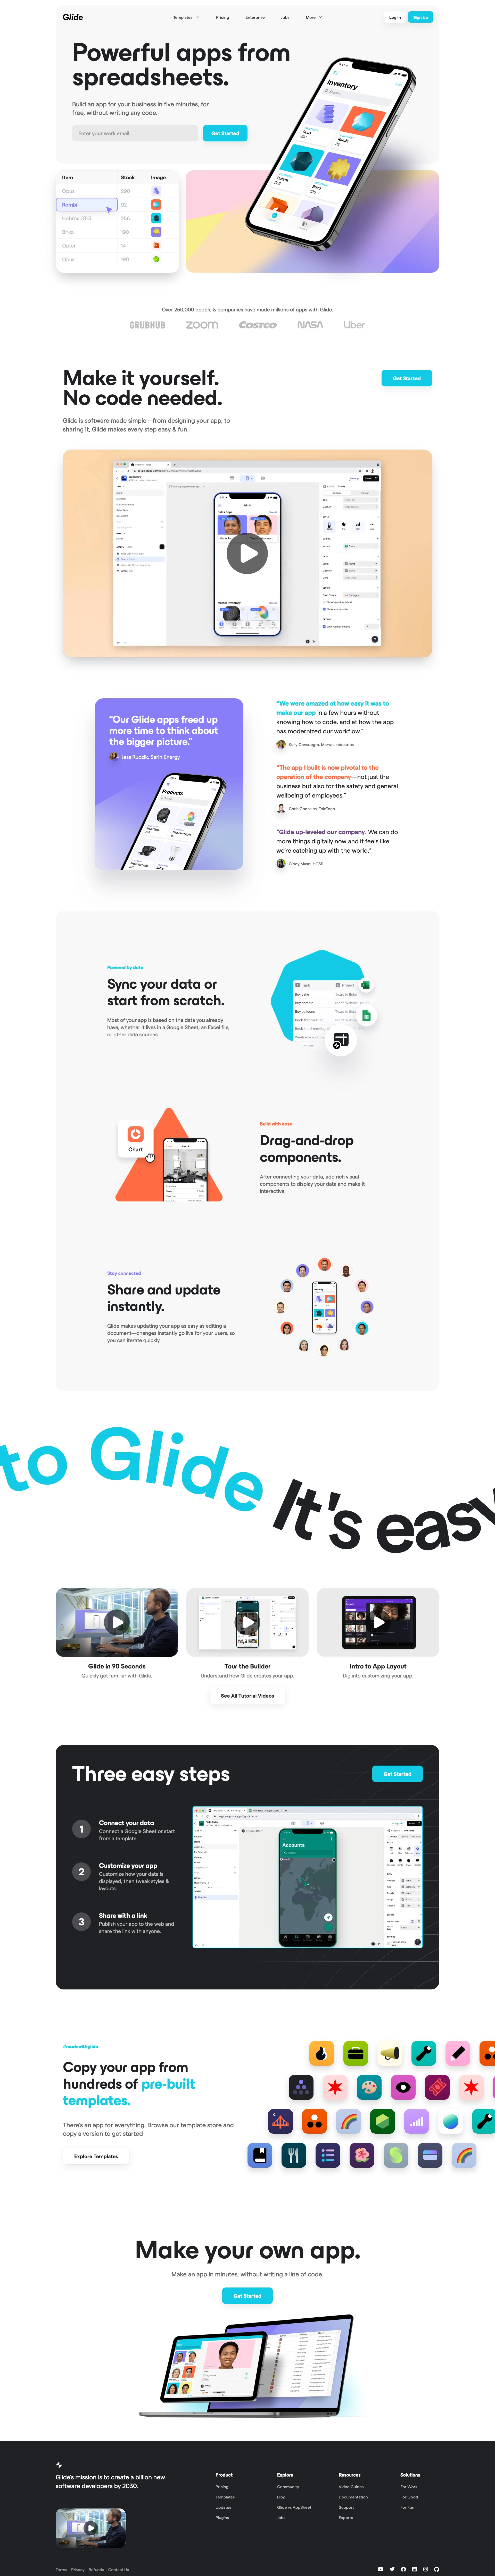 Glide Landing Page Example: Glide turns spreadsheets into powerful apps for work, without writing any code. Pick a spreadsheet or start with a template, customize your app, then share it instantly with anyone.